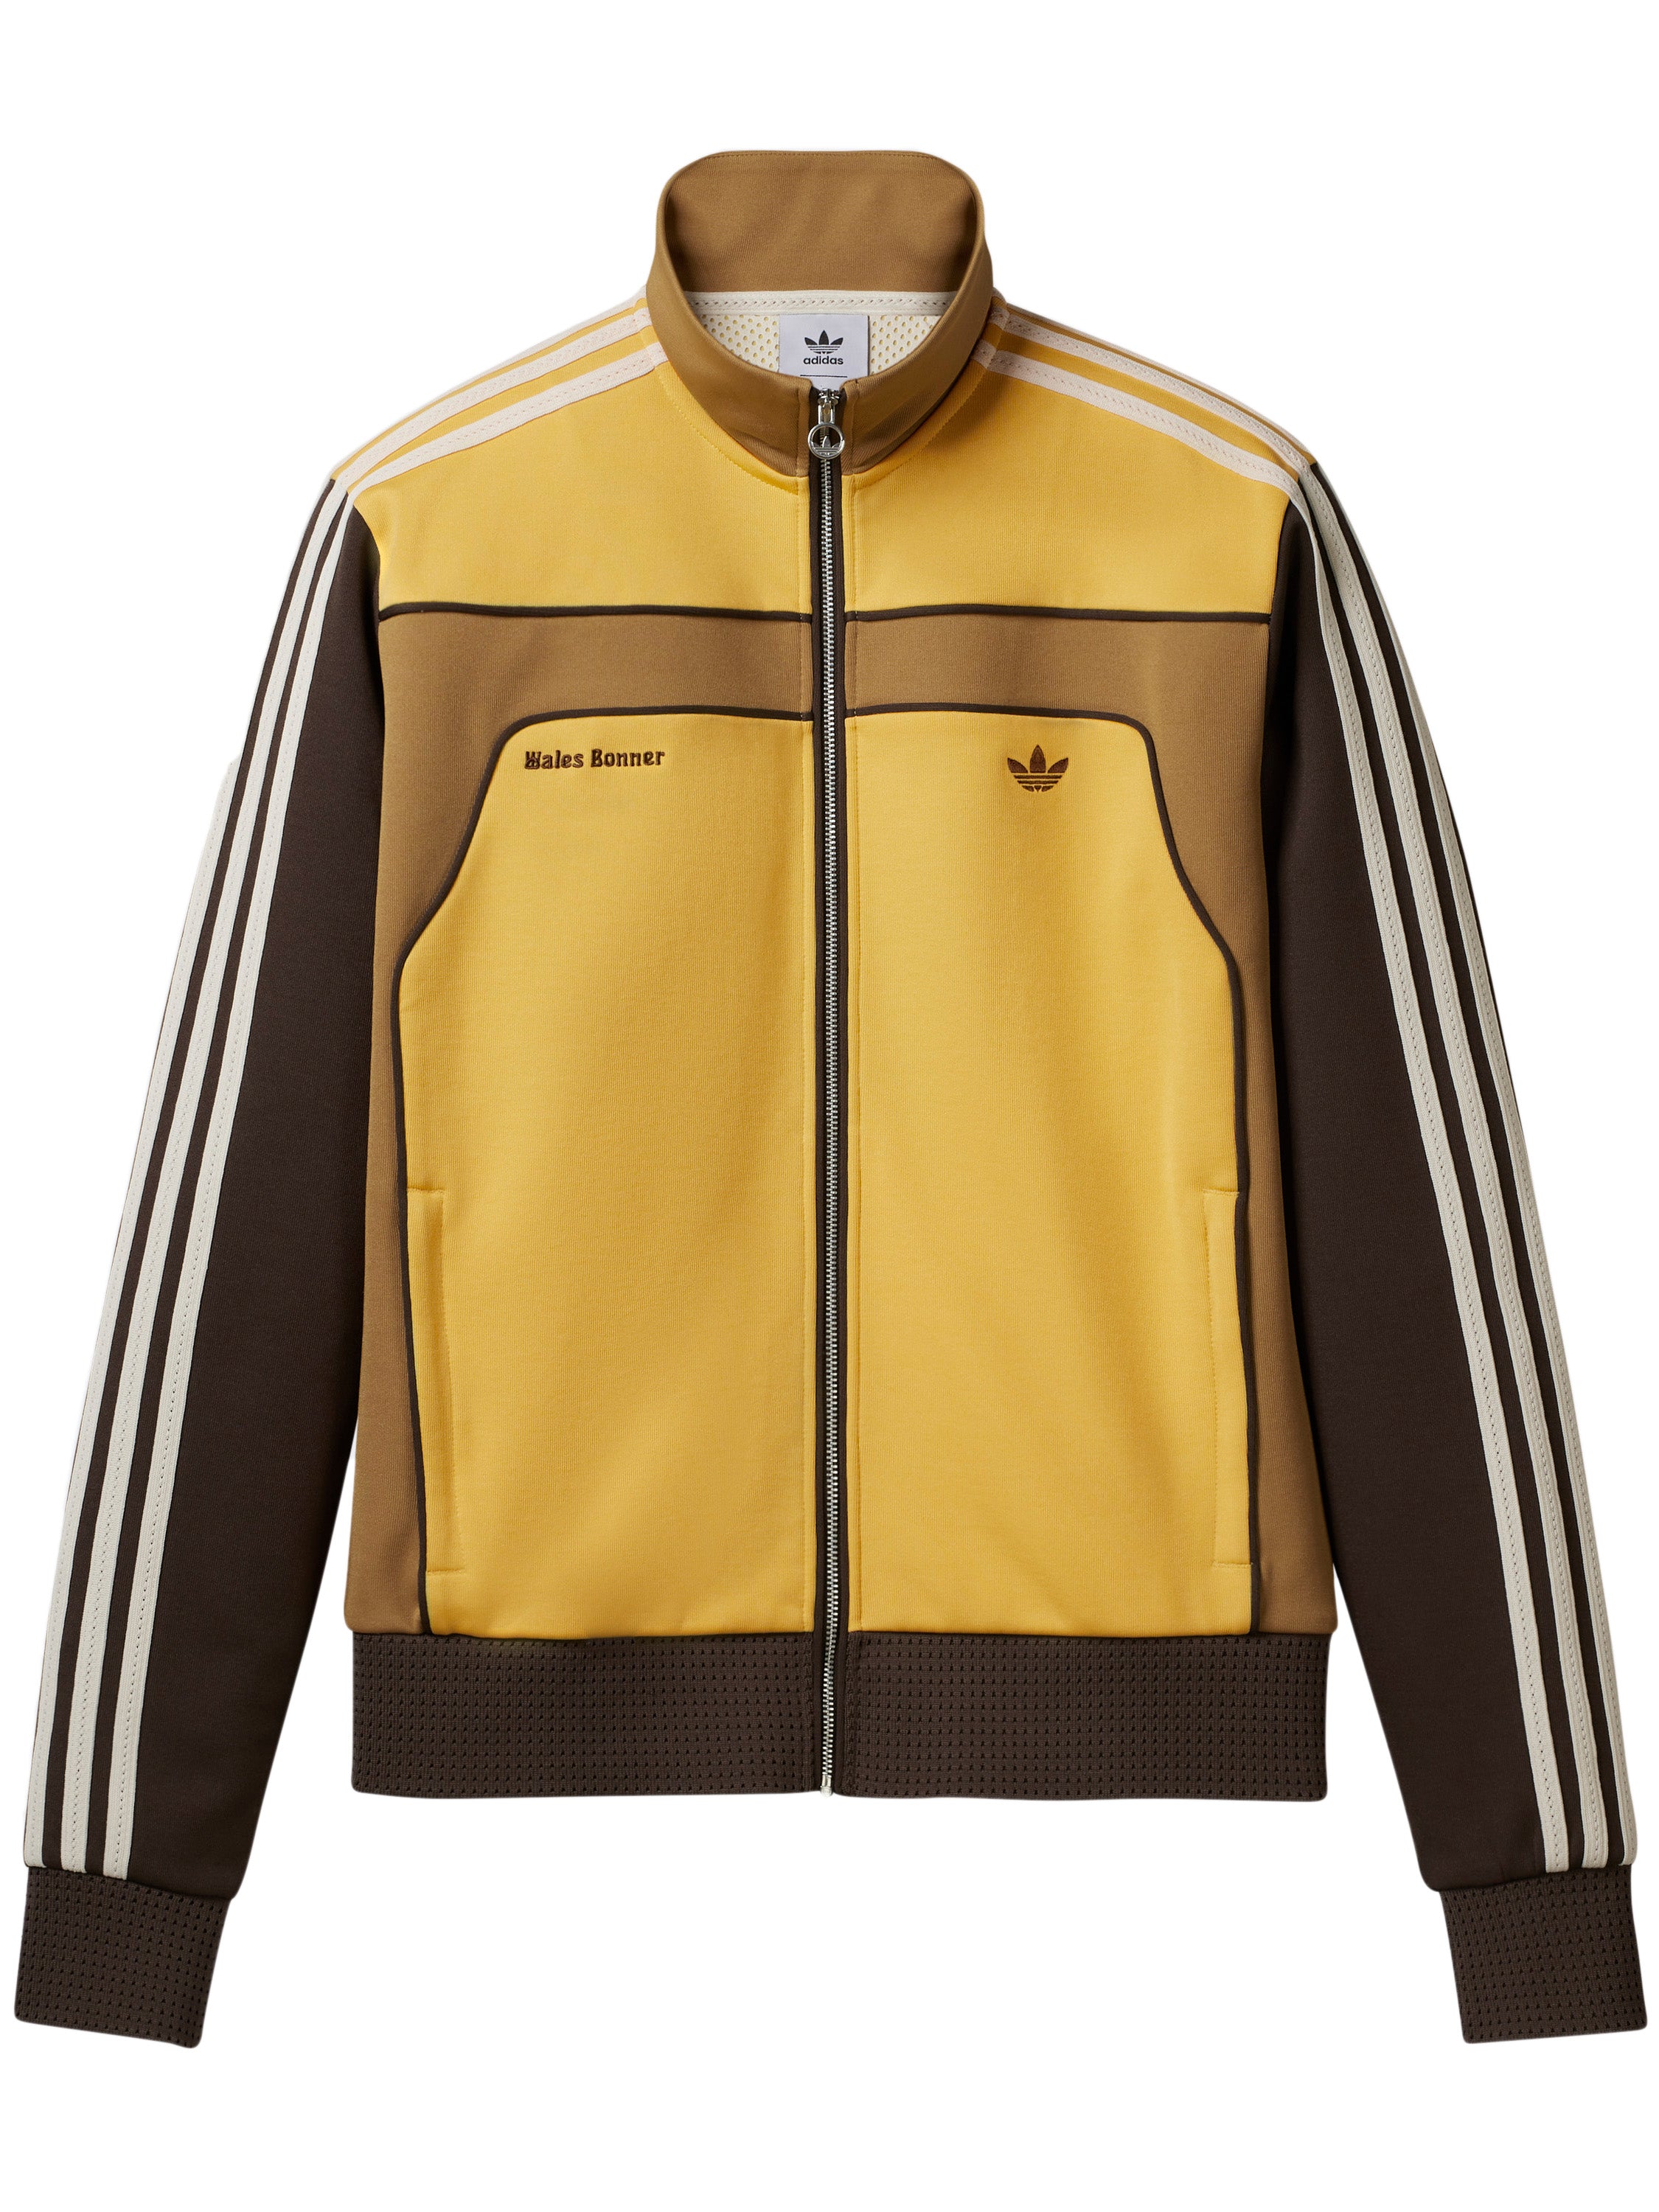 adidas x Wales Bonner - 80s Track Top in Yellow/Brown – Henrik Vibskov  Boutique